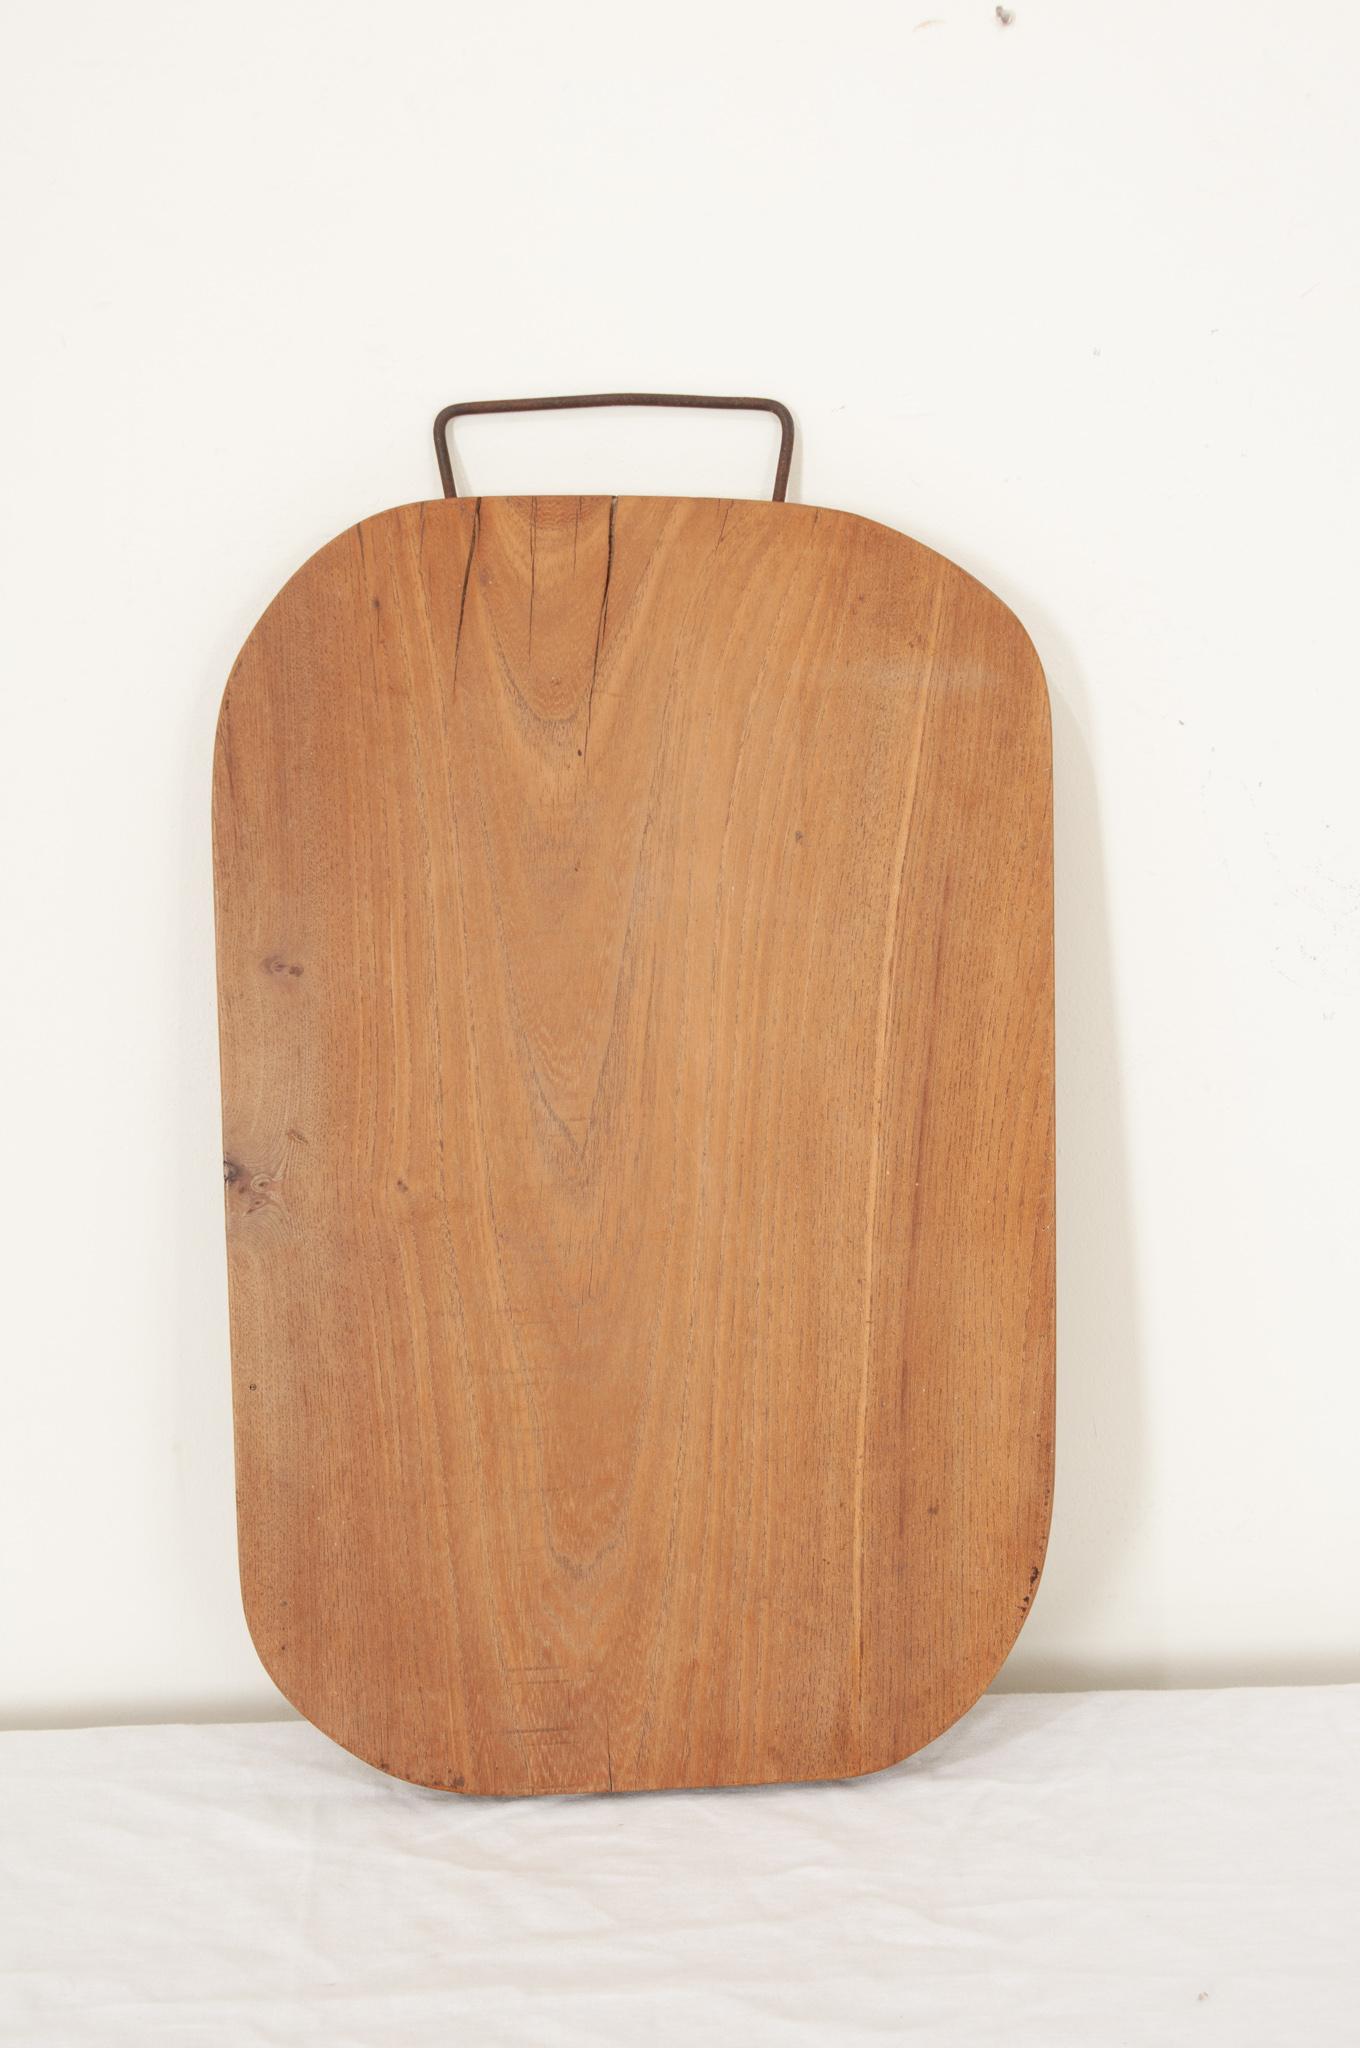 A 19th century long cutting board from England in an octagonal shape with smooth corners and a metal hanger on the end. The worn board is made of a single piece of wood. Knife marks and scrapes that were left by cooks, now long gone, can be seen and